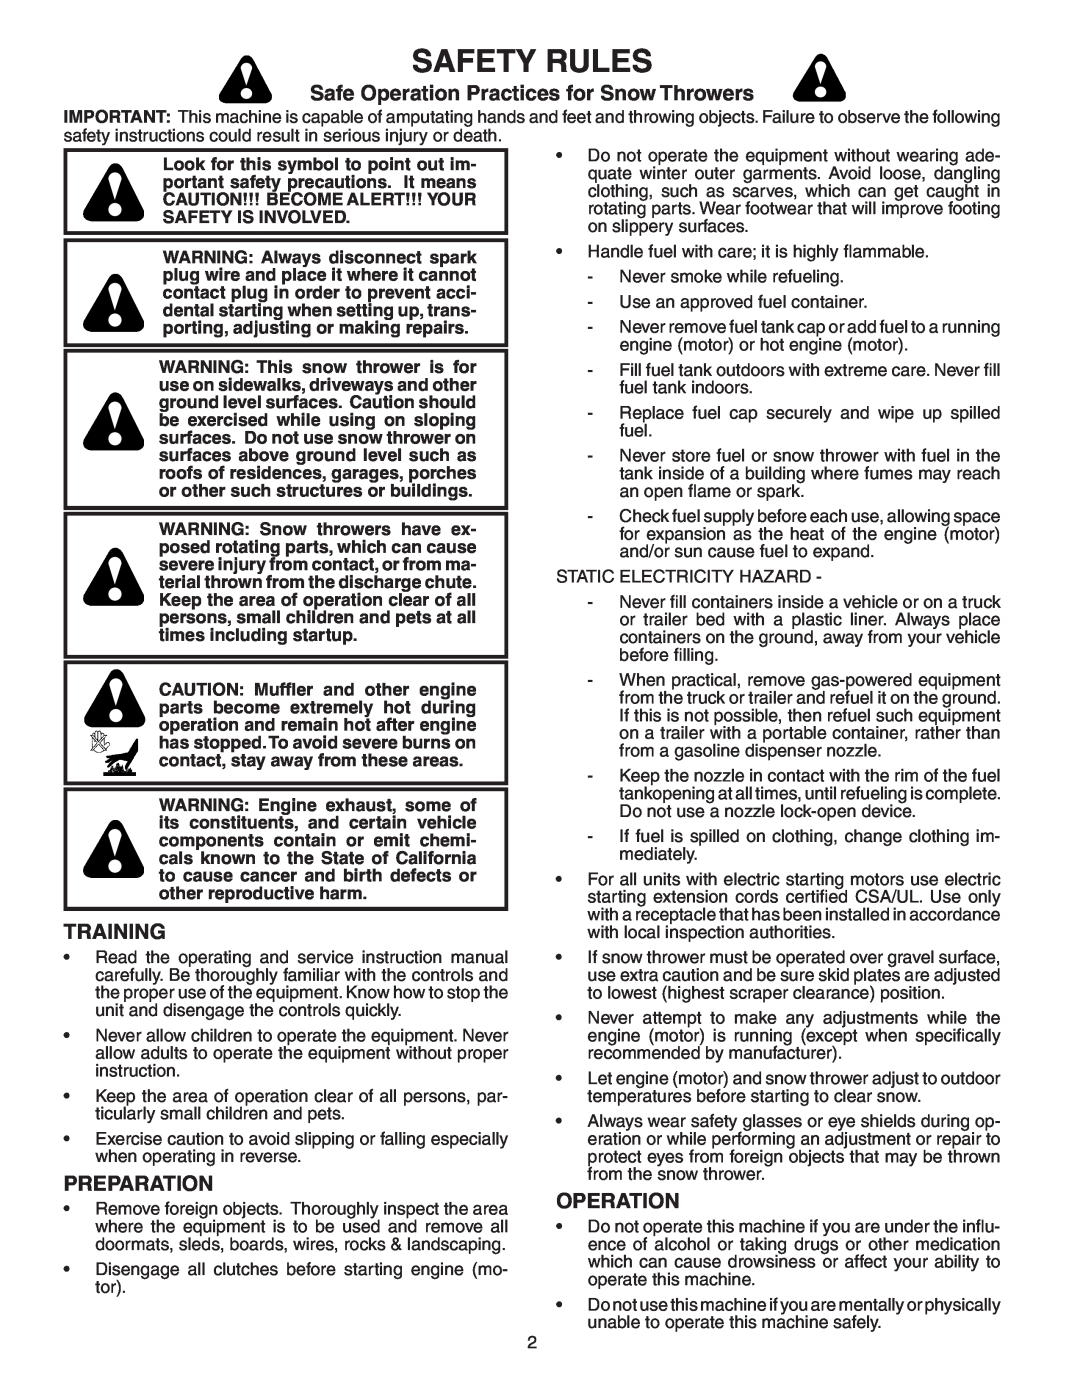 Poulan PP5524ESA owner manual Safety Rules, Safe Operation Practices for Snow Throwers, Training, Preparation 